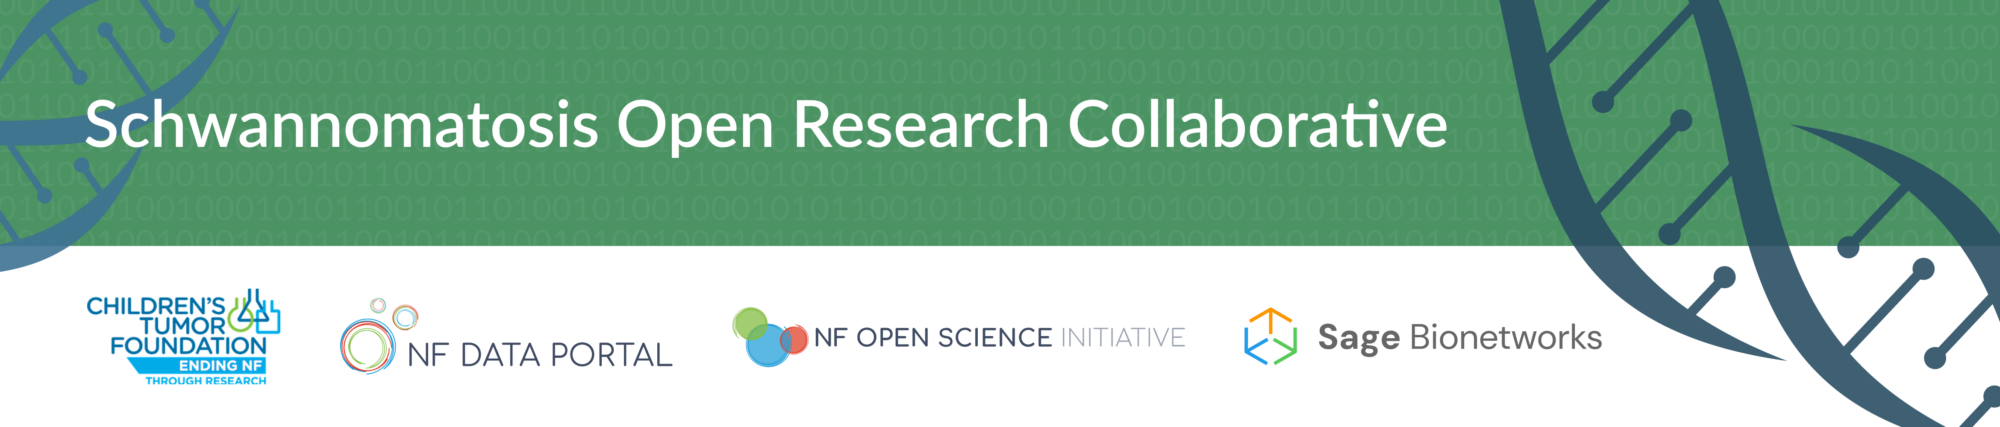 Banner for schwannomatosis open research collaborative, involving children's tumor foundation, nf data portal, and sage bionetworks.